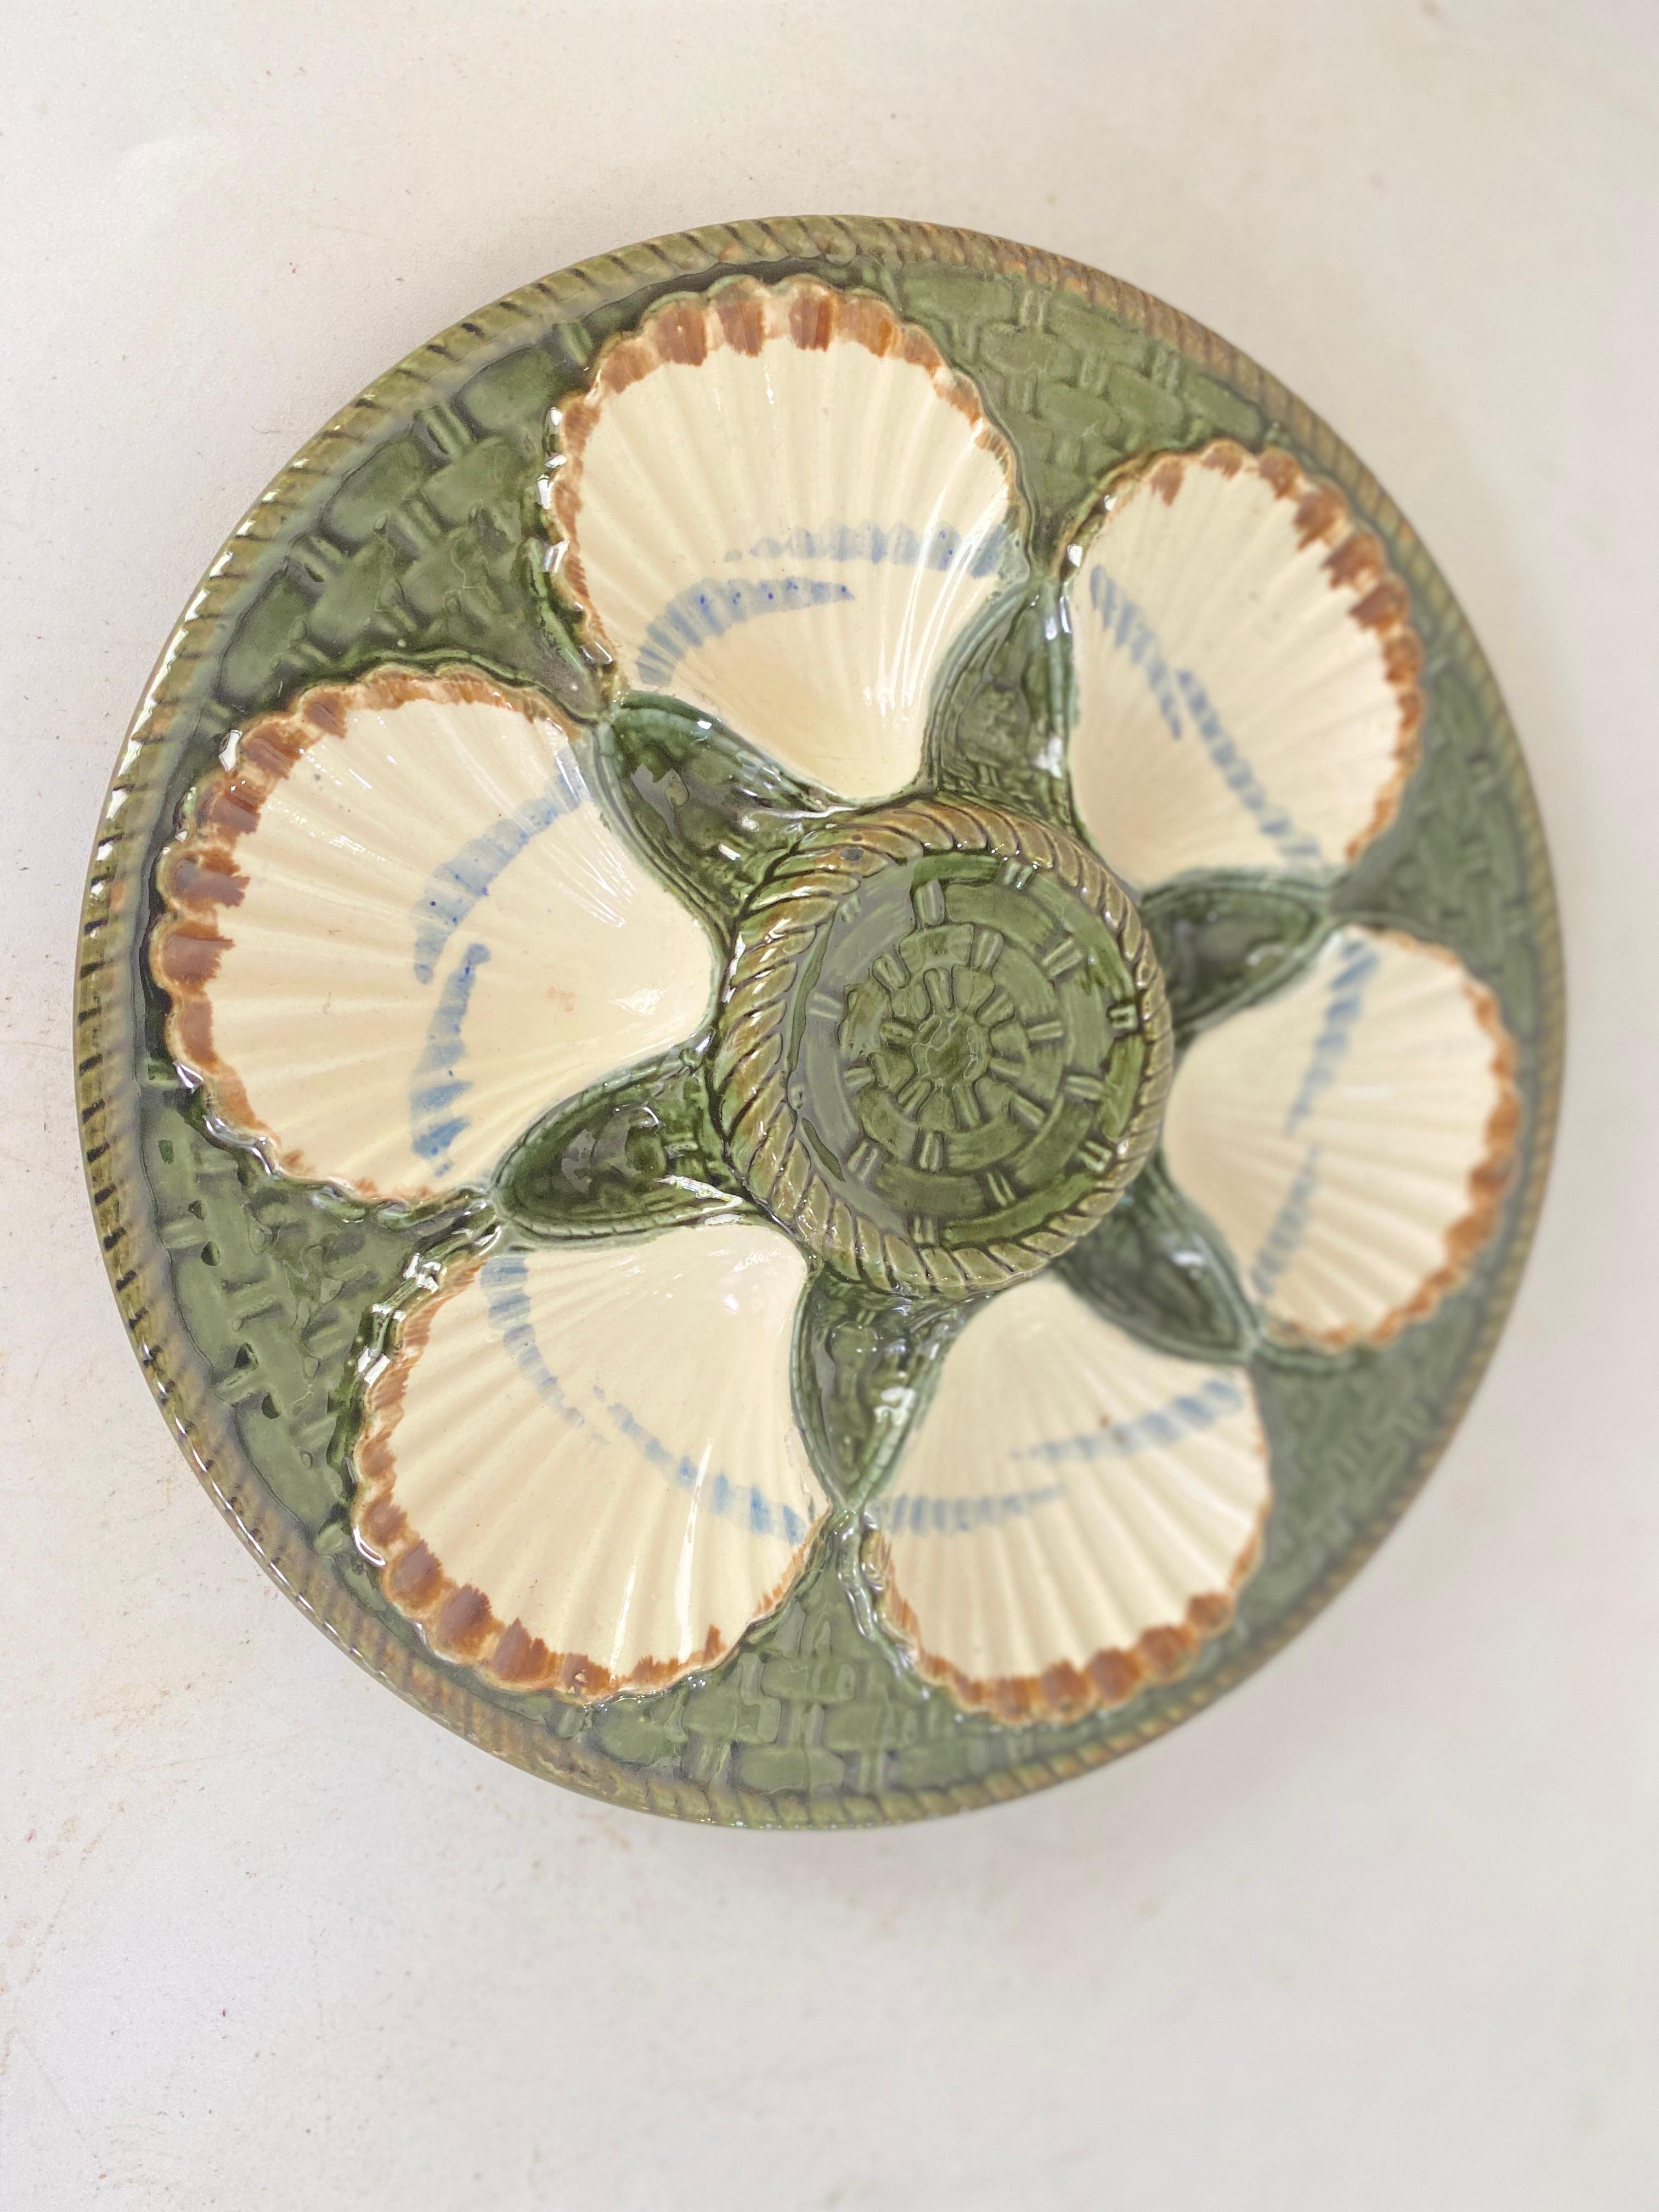 Oyster Plate in Majolica Green and White Color 19th Century Longchamp Set of 2 5